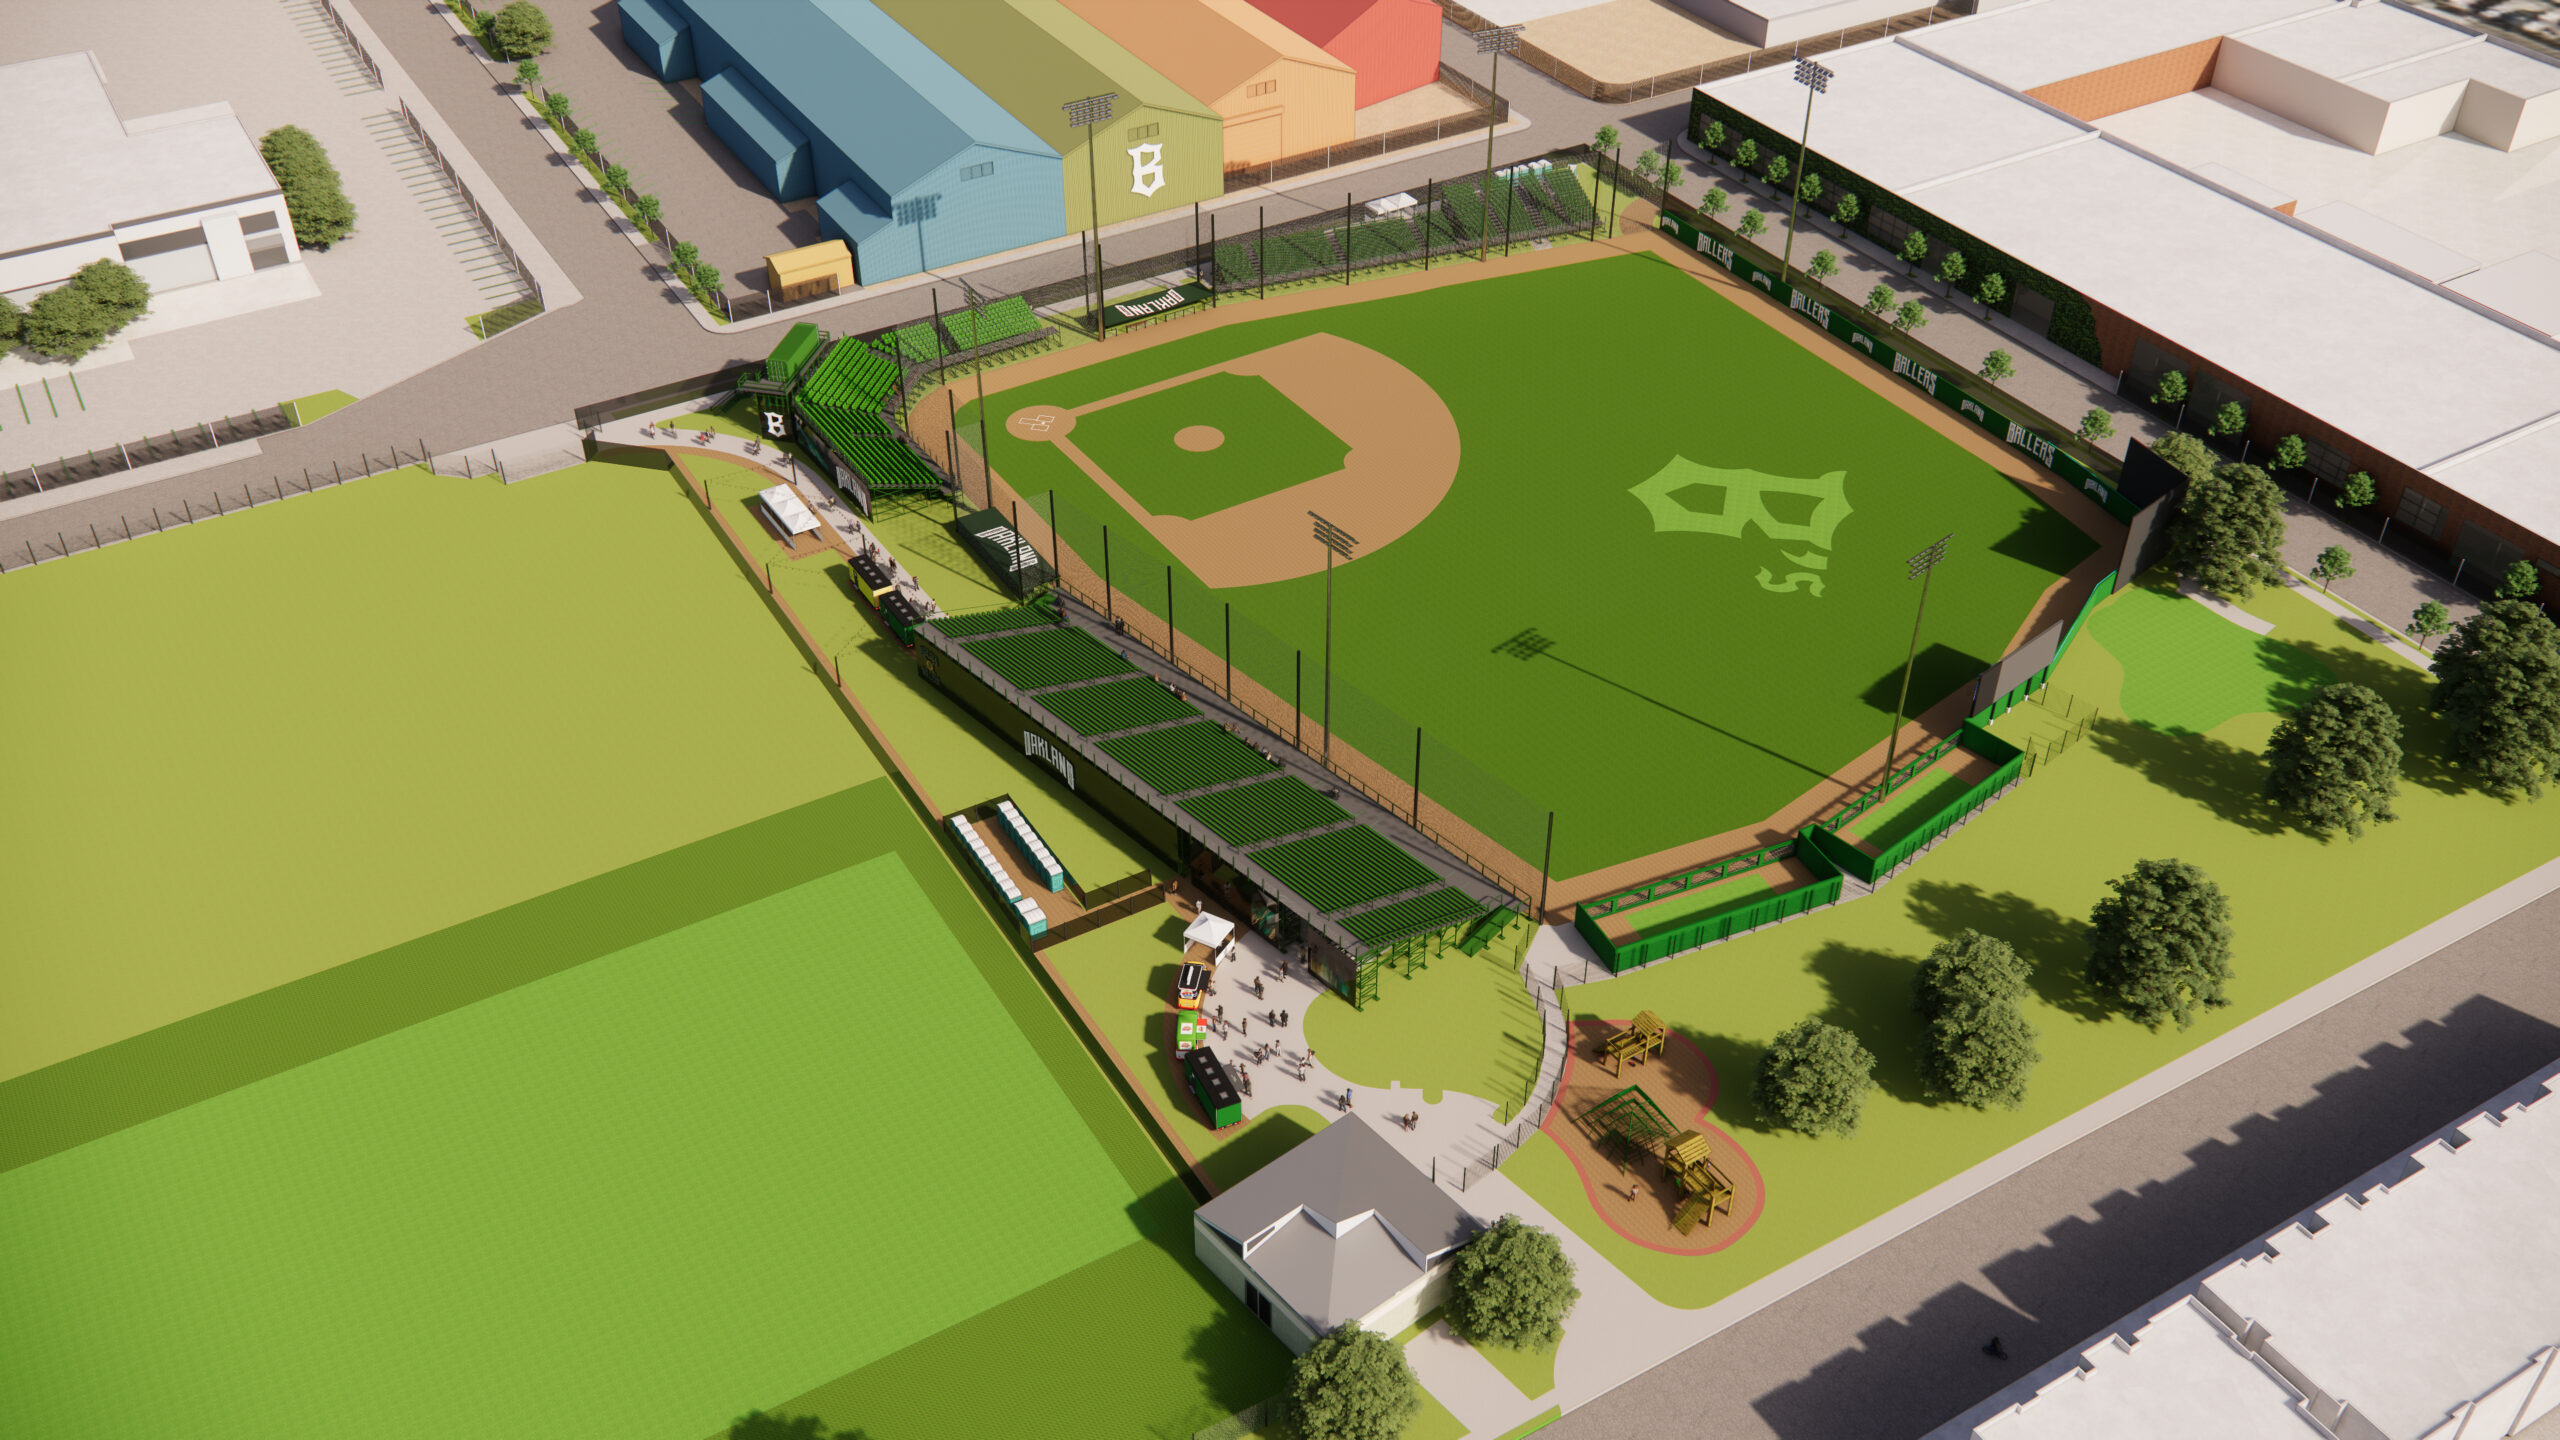 Oakland Ballers Baseball Field aerial view, rendering by Enscape for Canopy Team